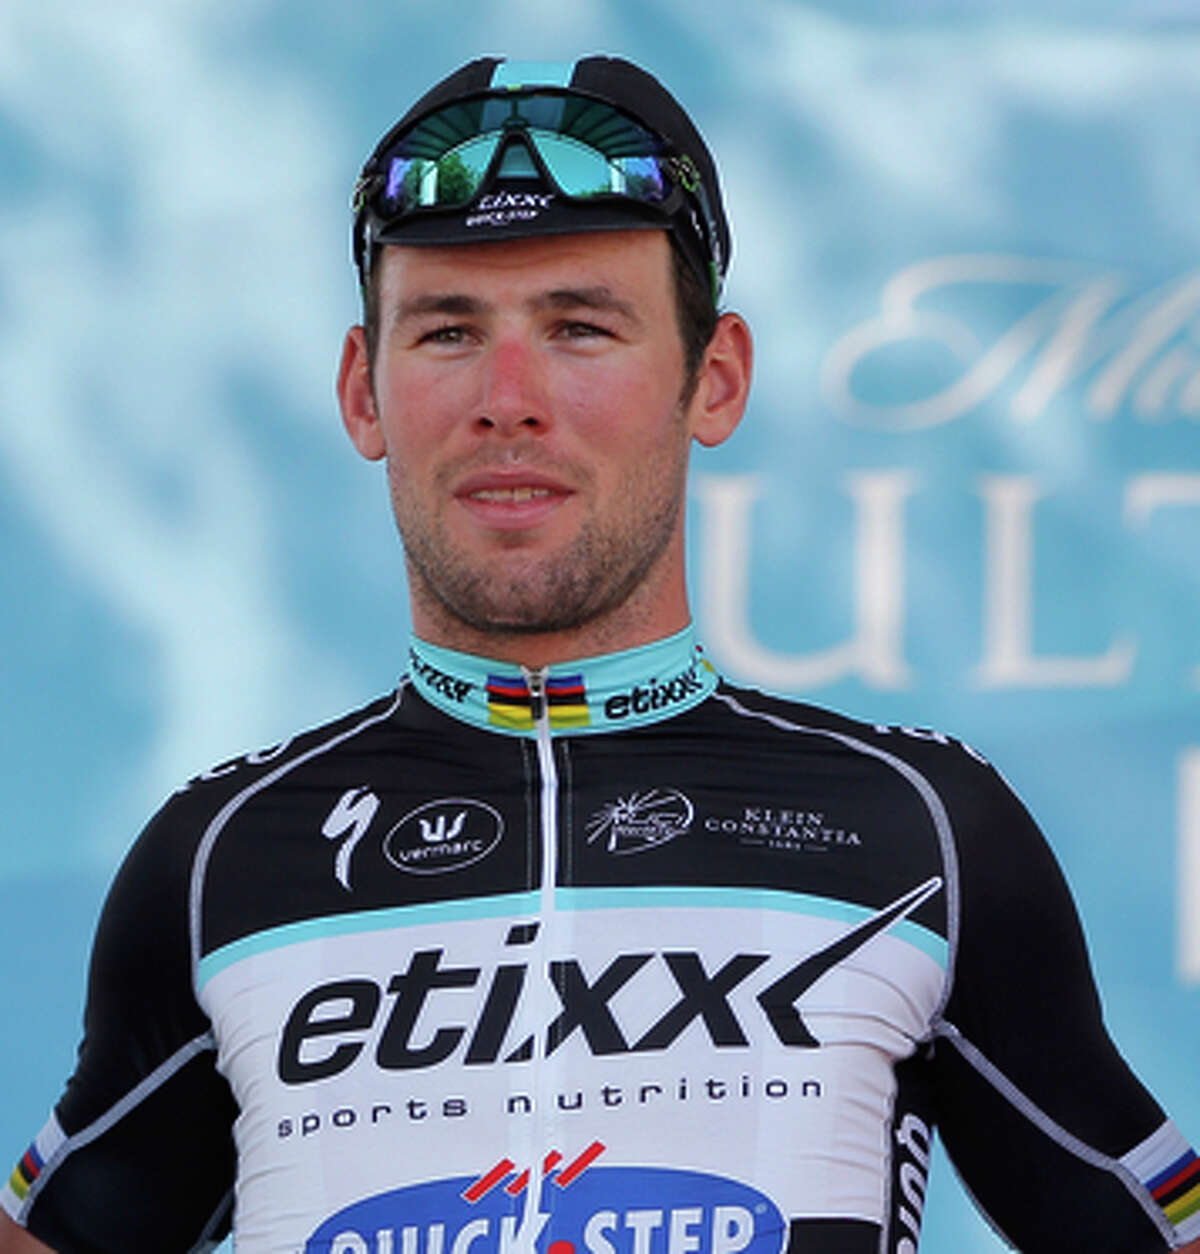 Cavendish wins 2nd straight stage in Tour of California